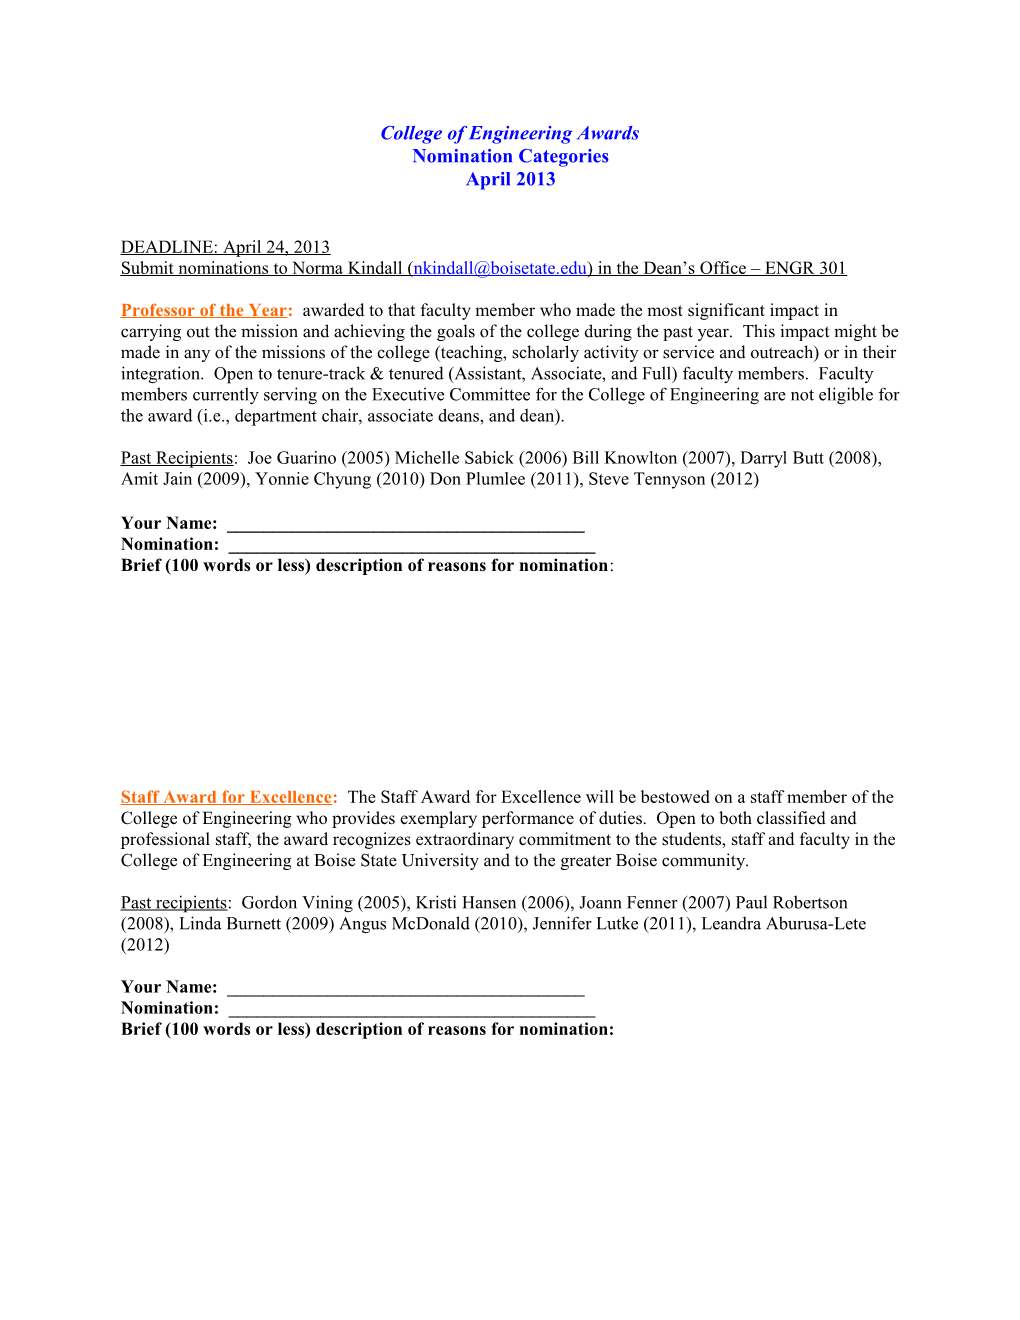 College of Engineering Awards Nomination Categories